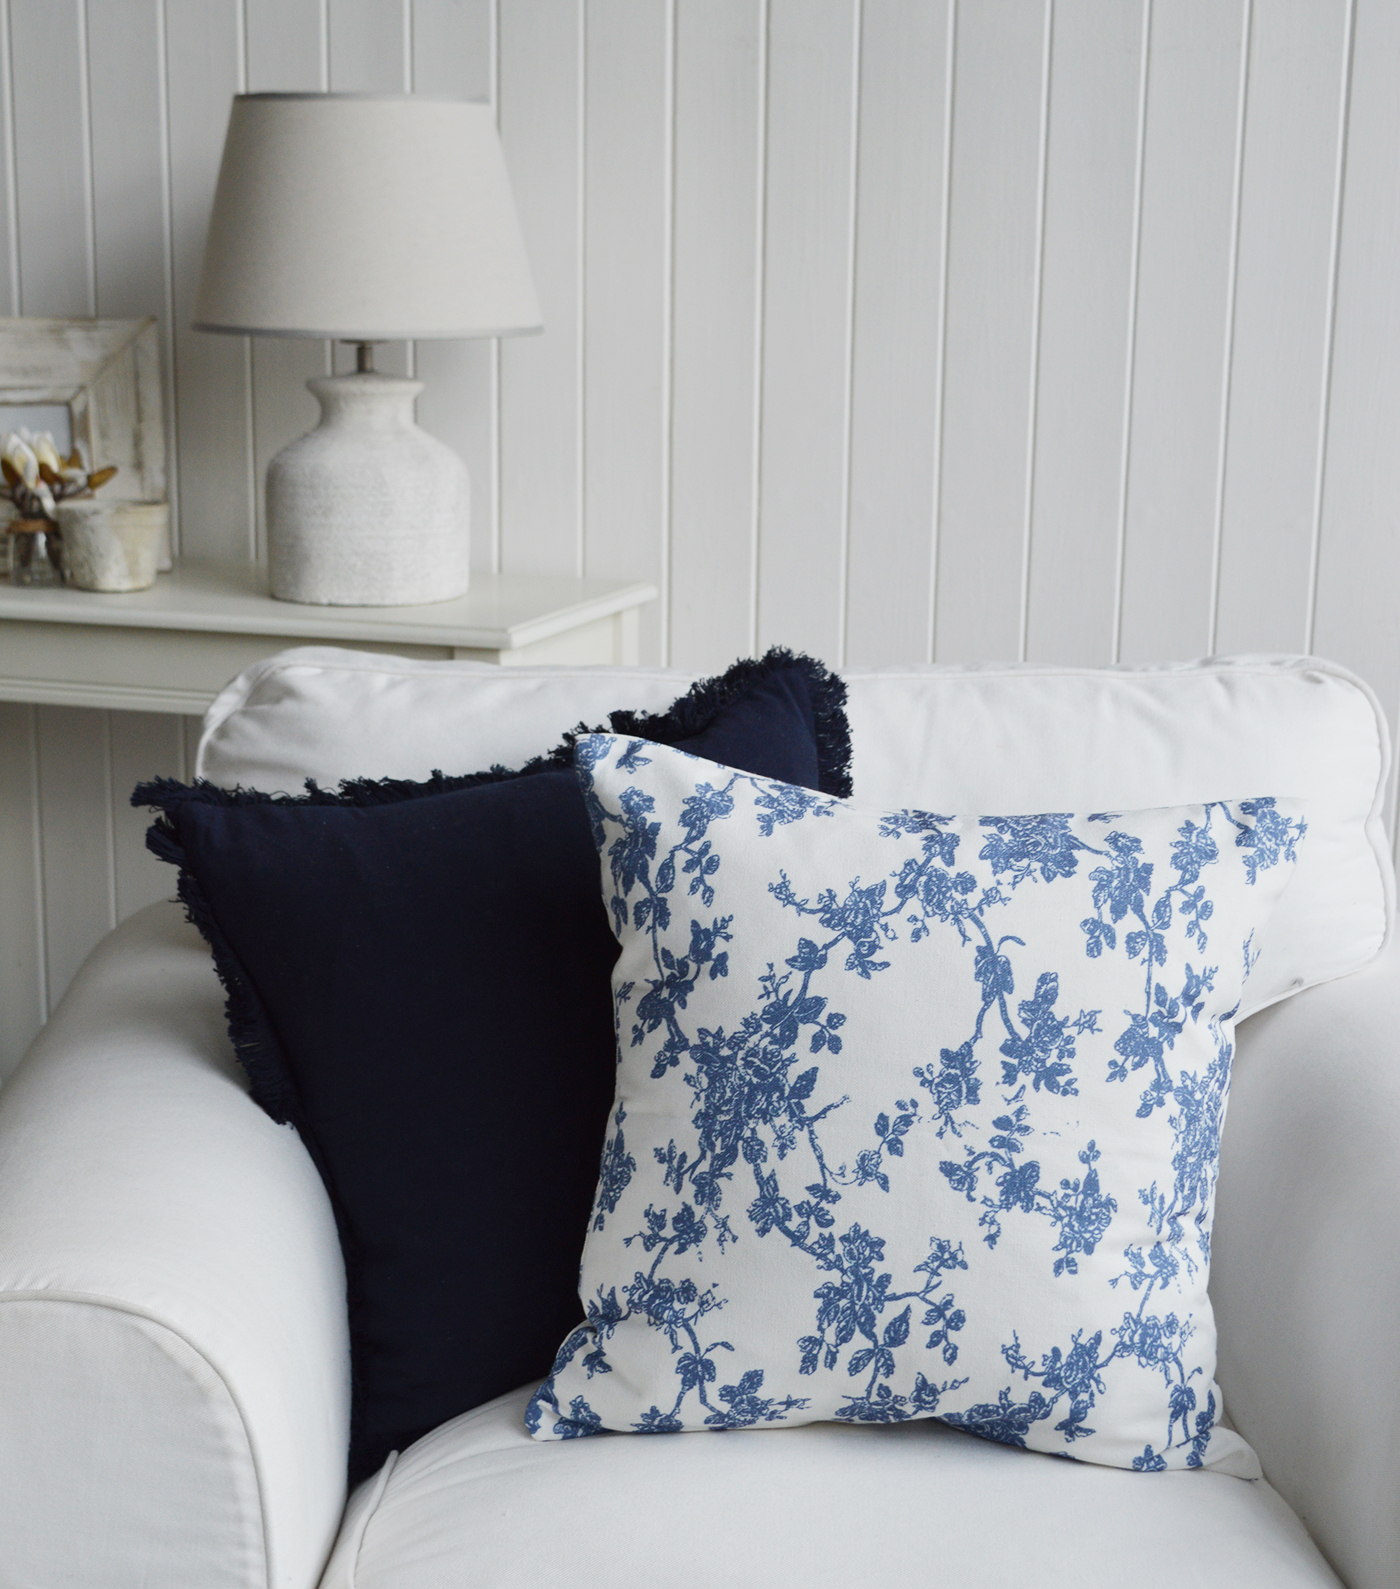 Marlow blue and white floral cushions for Hamptons coastal interiors